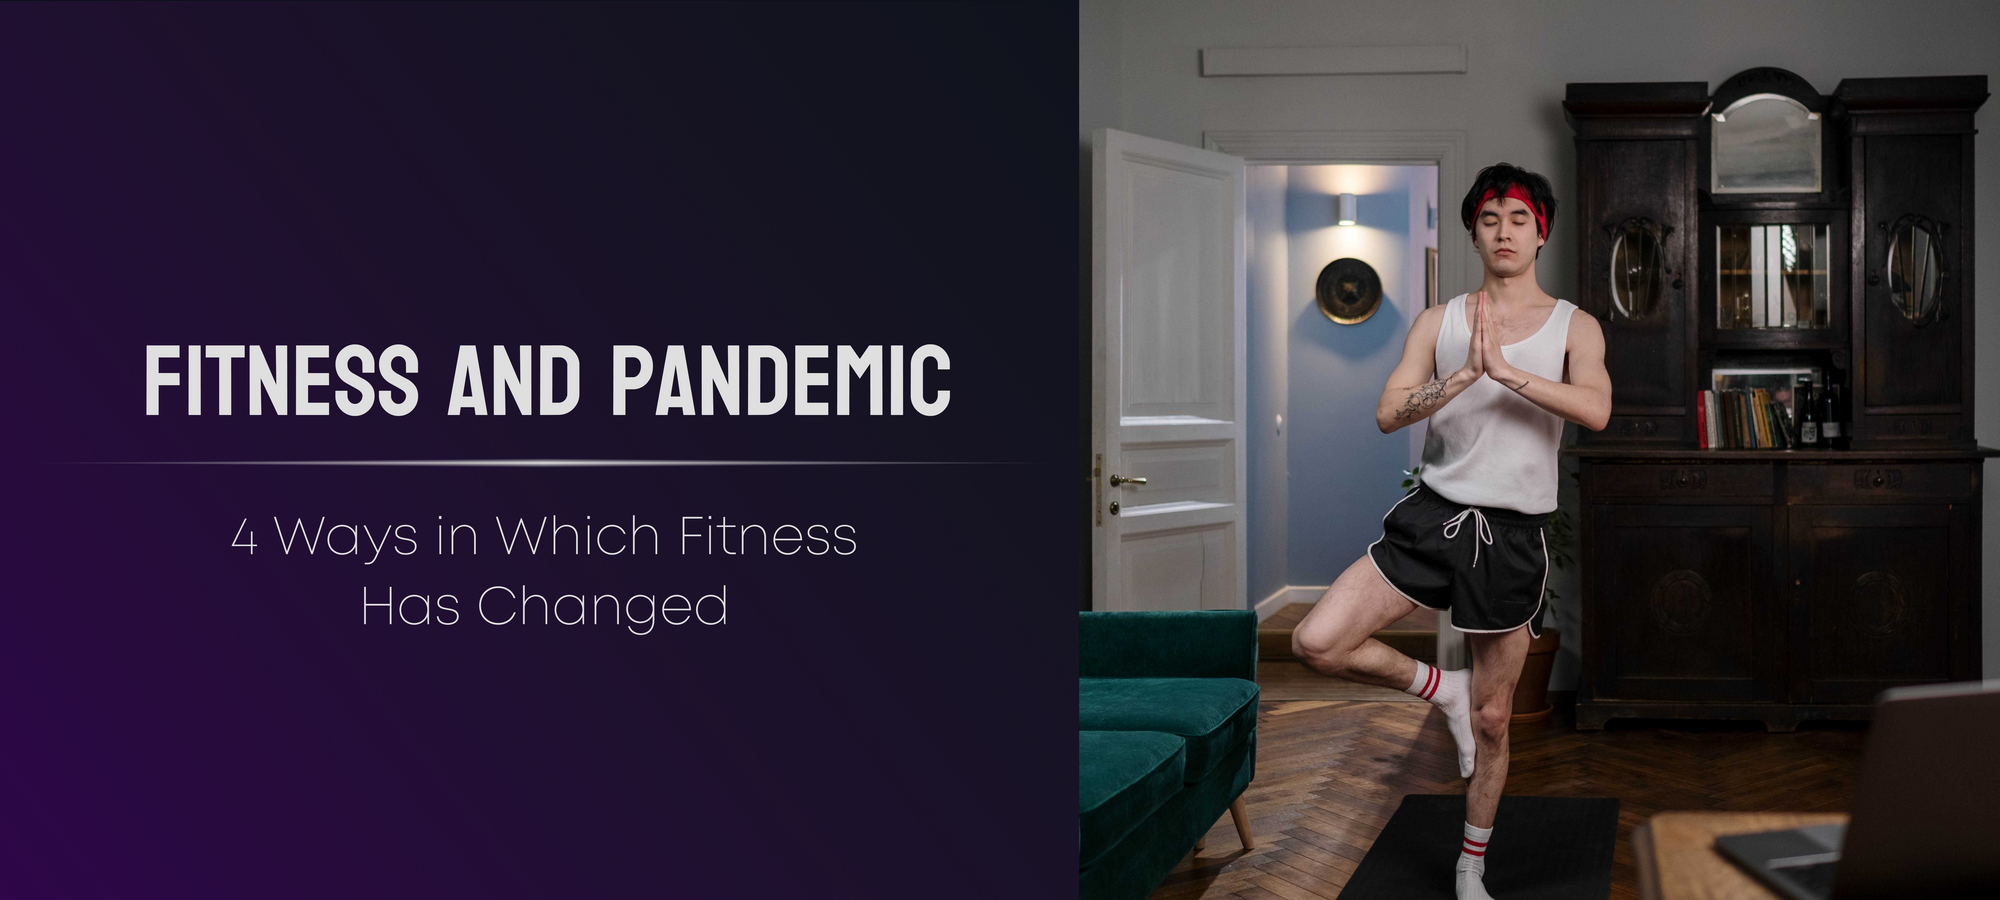 Have people adapted their fitness routines to suit their pandemic schedule? 